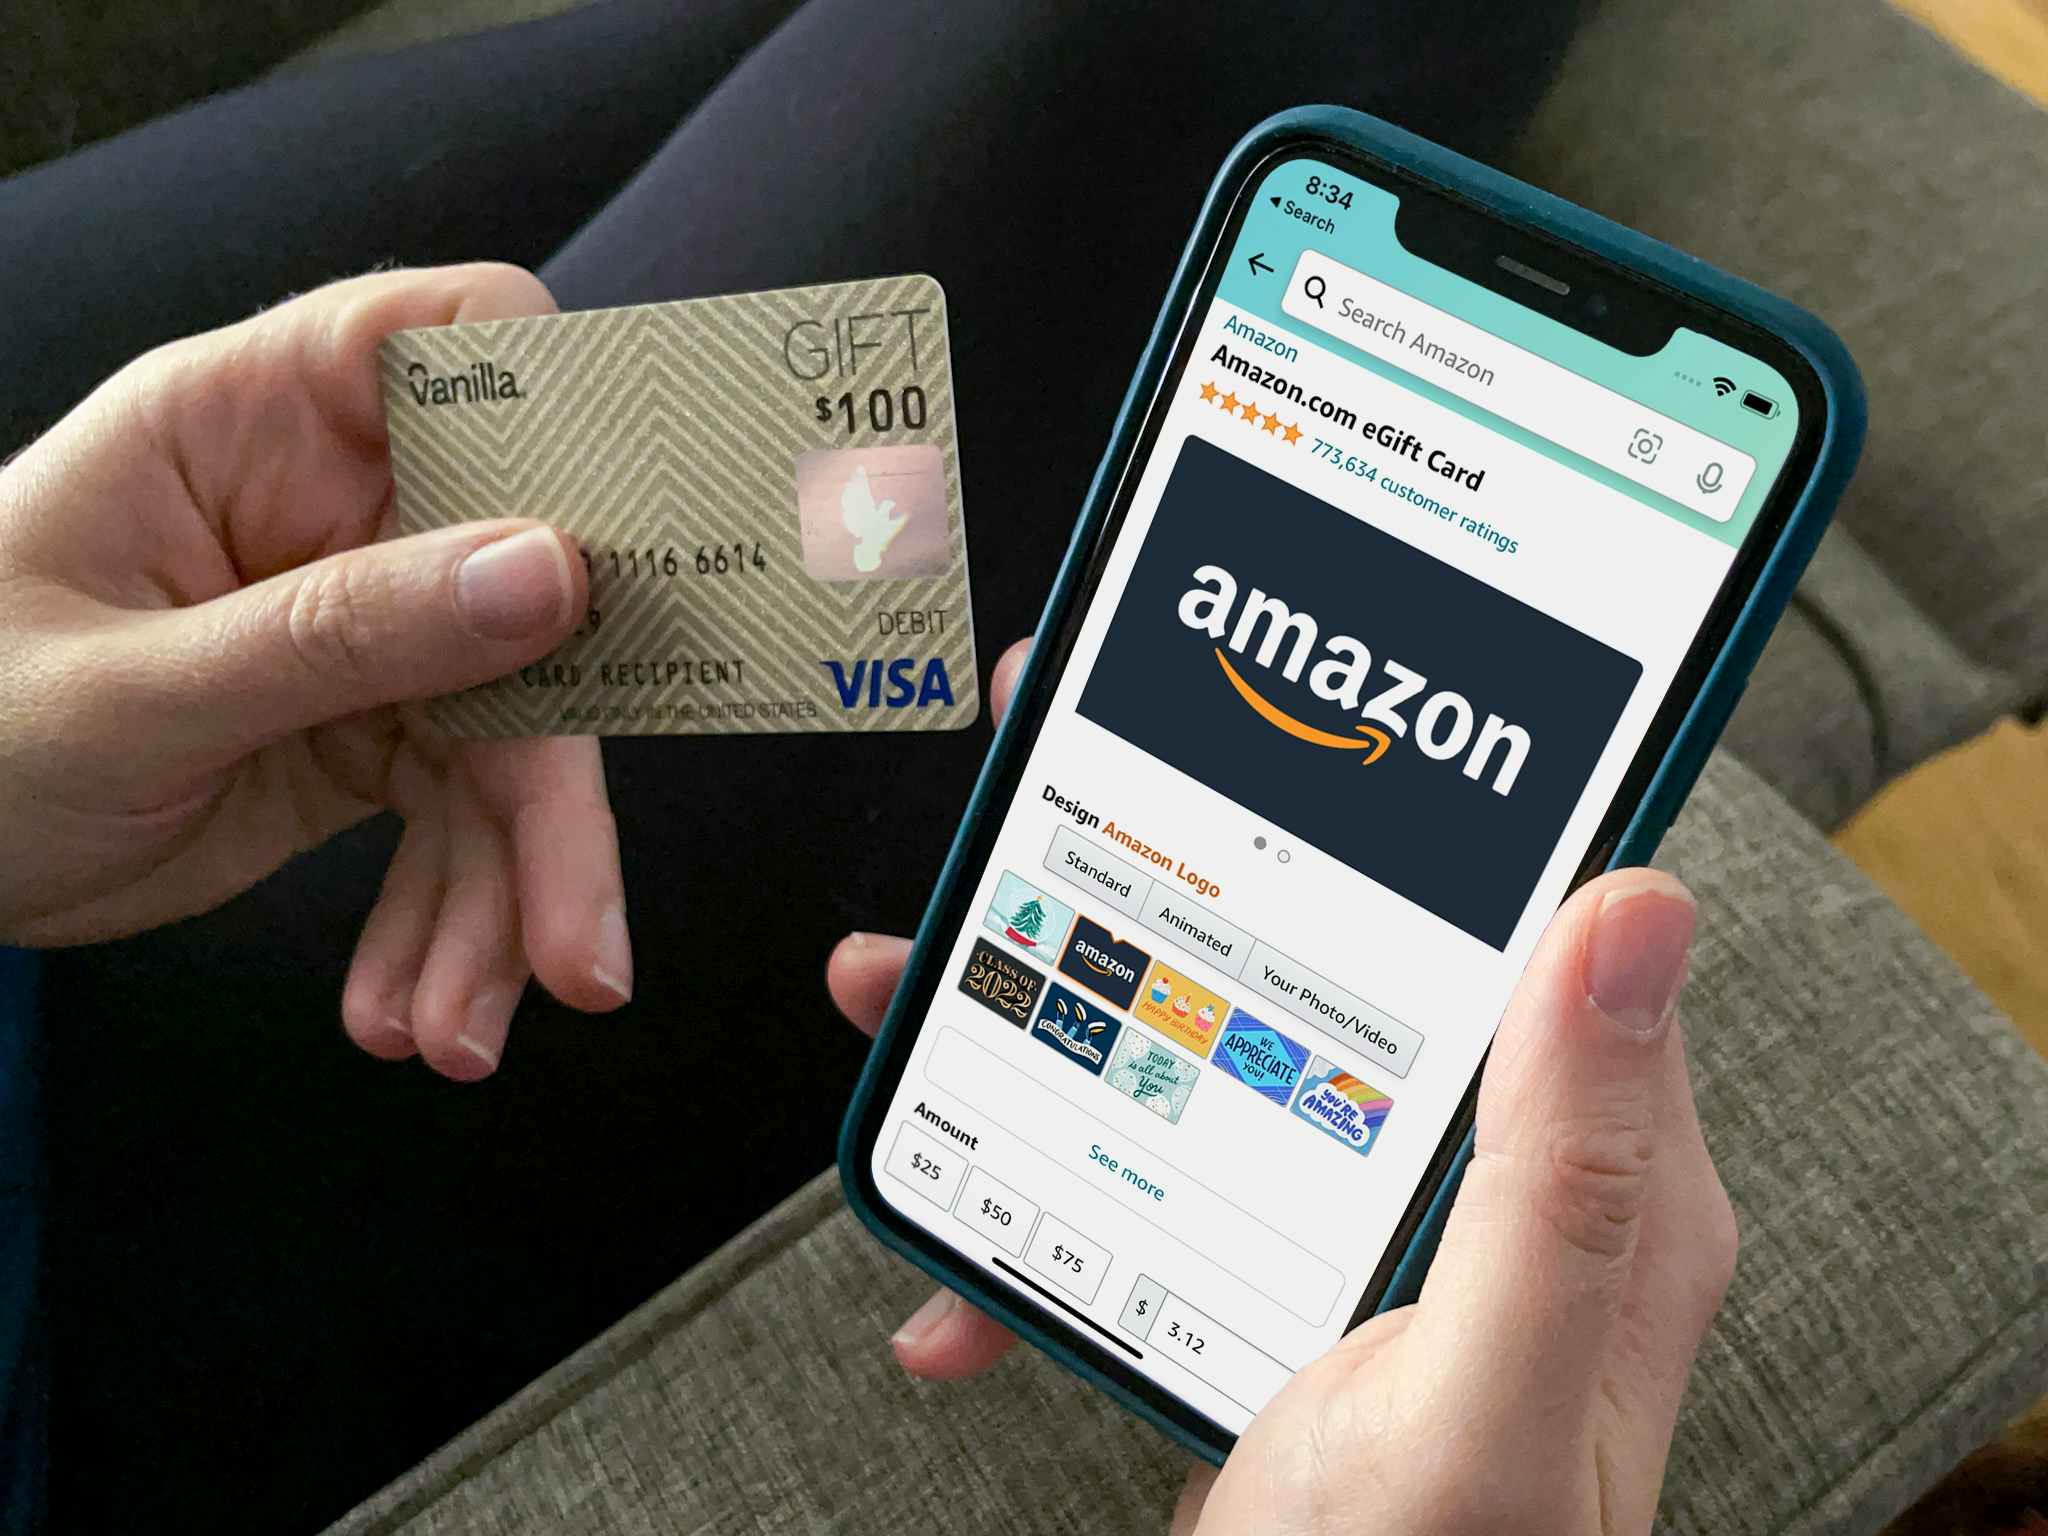 A person holding a visa gift card next to a cell phone open to an amazon gift card purchase page.